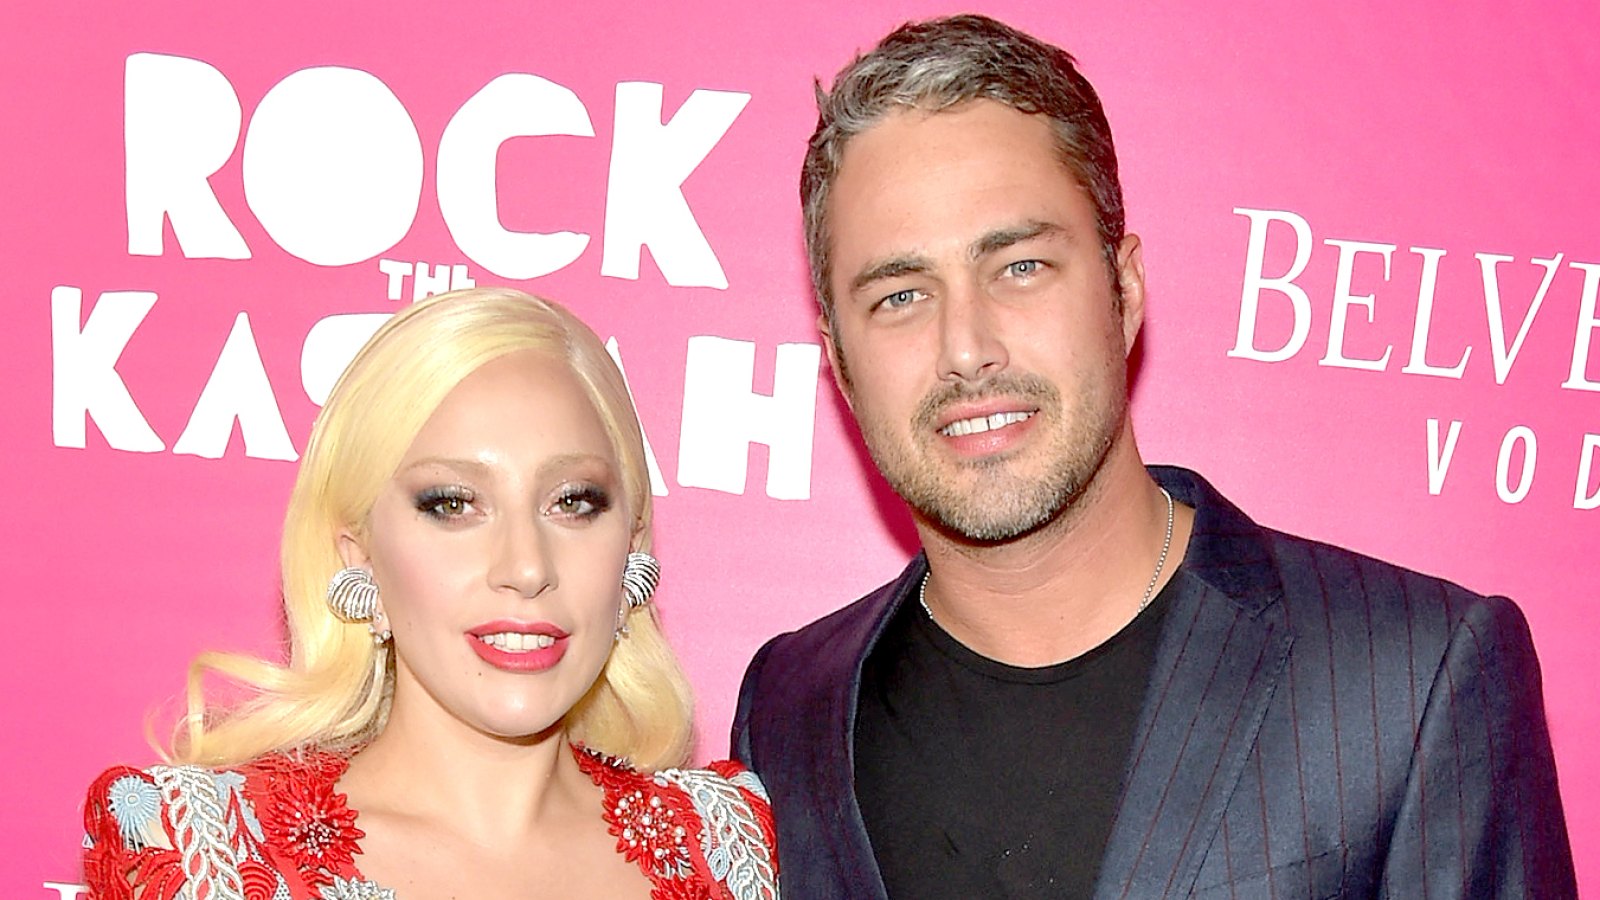 Lady Gaga and Taylor Kinney attend the "Rock The Kasbah" New York Premiere at AMC Loews Lincoln Square 13 theater on October 19, 2015 in New York City.